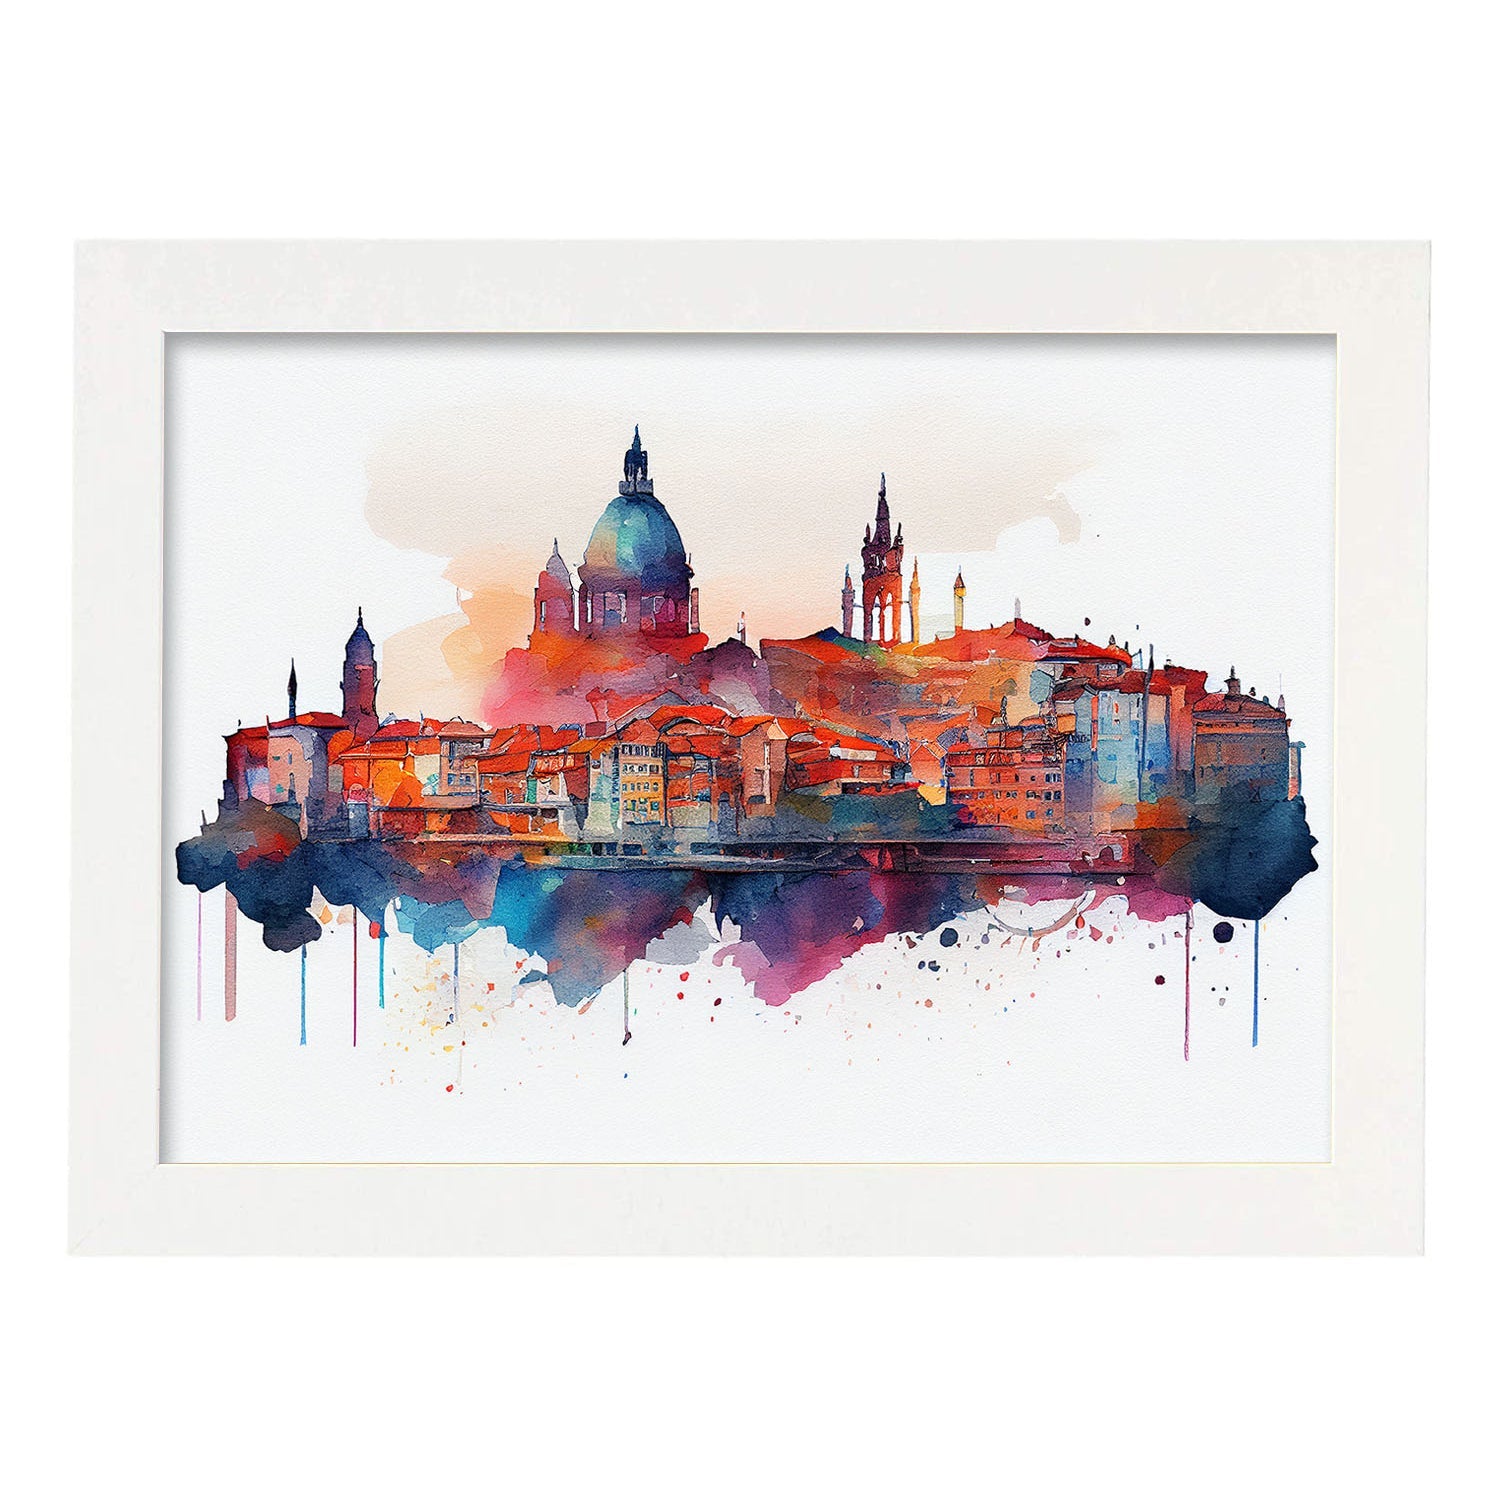 Nacnic watercolor of a skyline of the city of Porto. Aesthetic Wall Art Prints for Bedroom or Living Room Design.-Artwork-Nacnic-A4-Marco Blanco-Nacnic Estudio SL